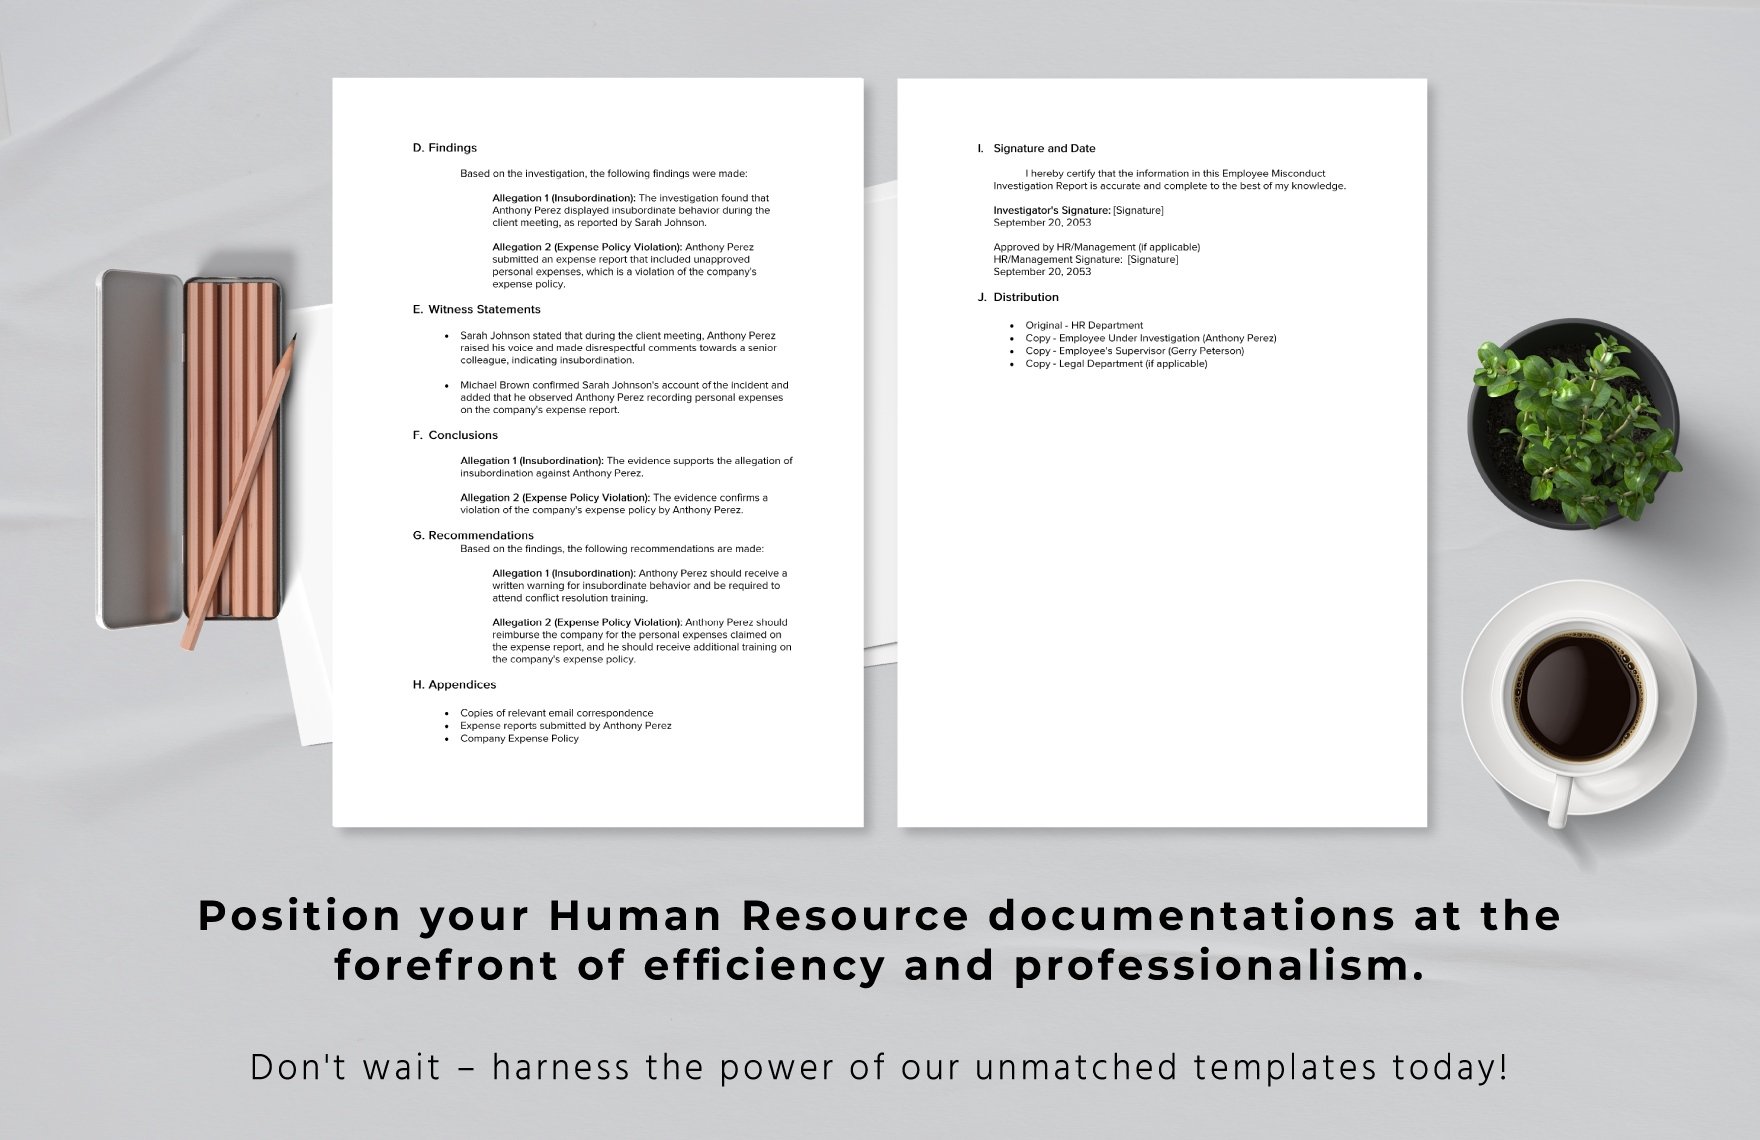 Employee Misconduct Investigation Report HR Template